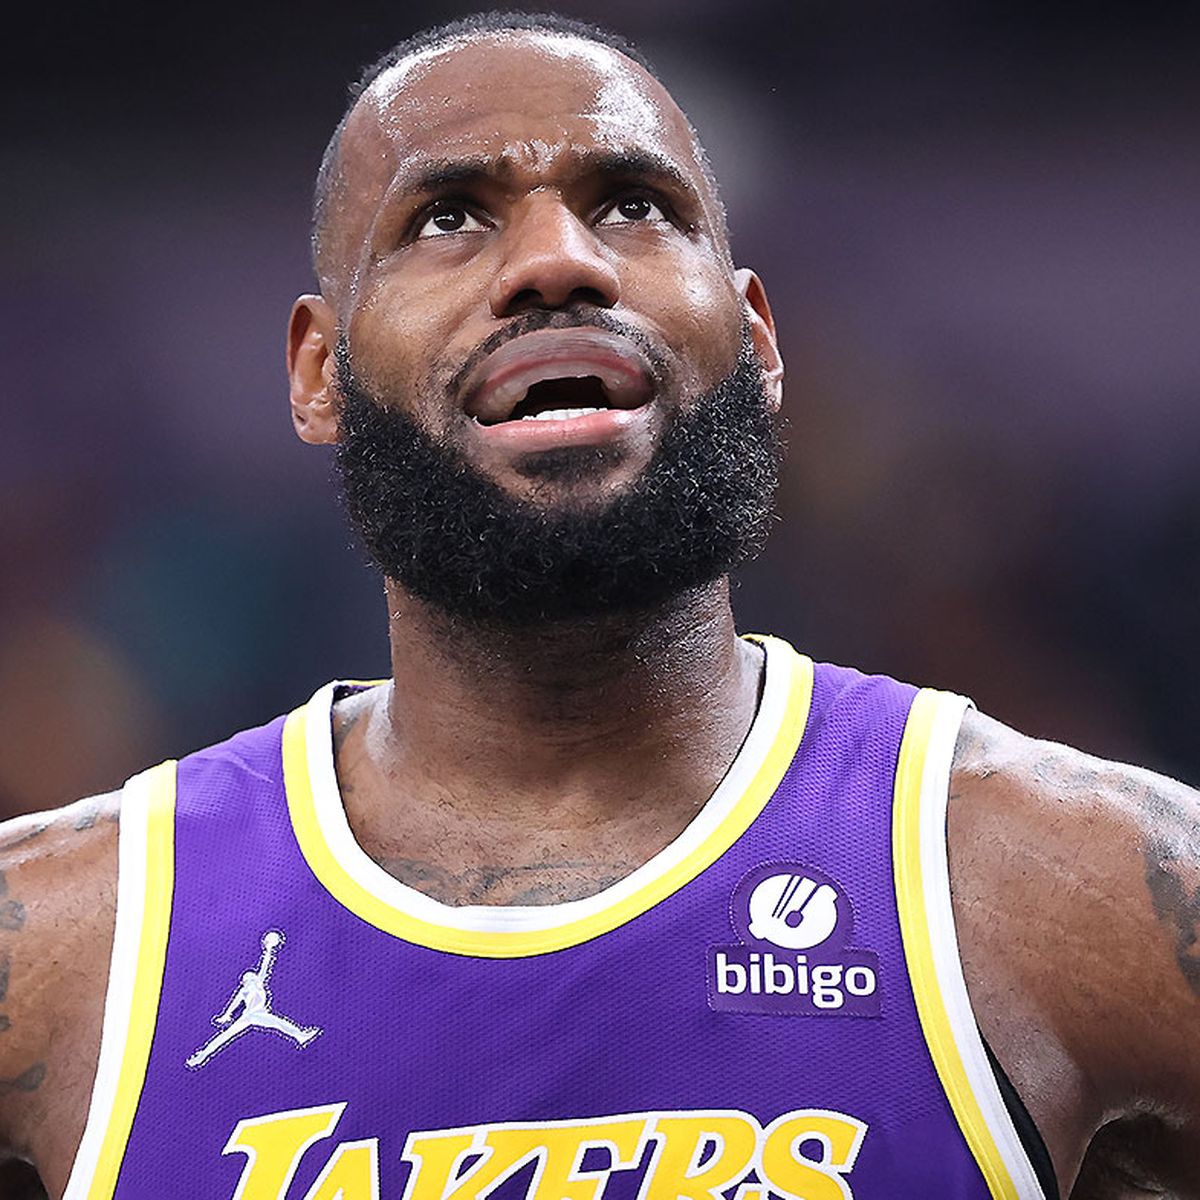 Lakers' LeBron James cleared after 2 negative COVID-19 tests